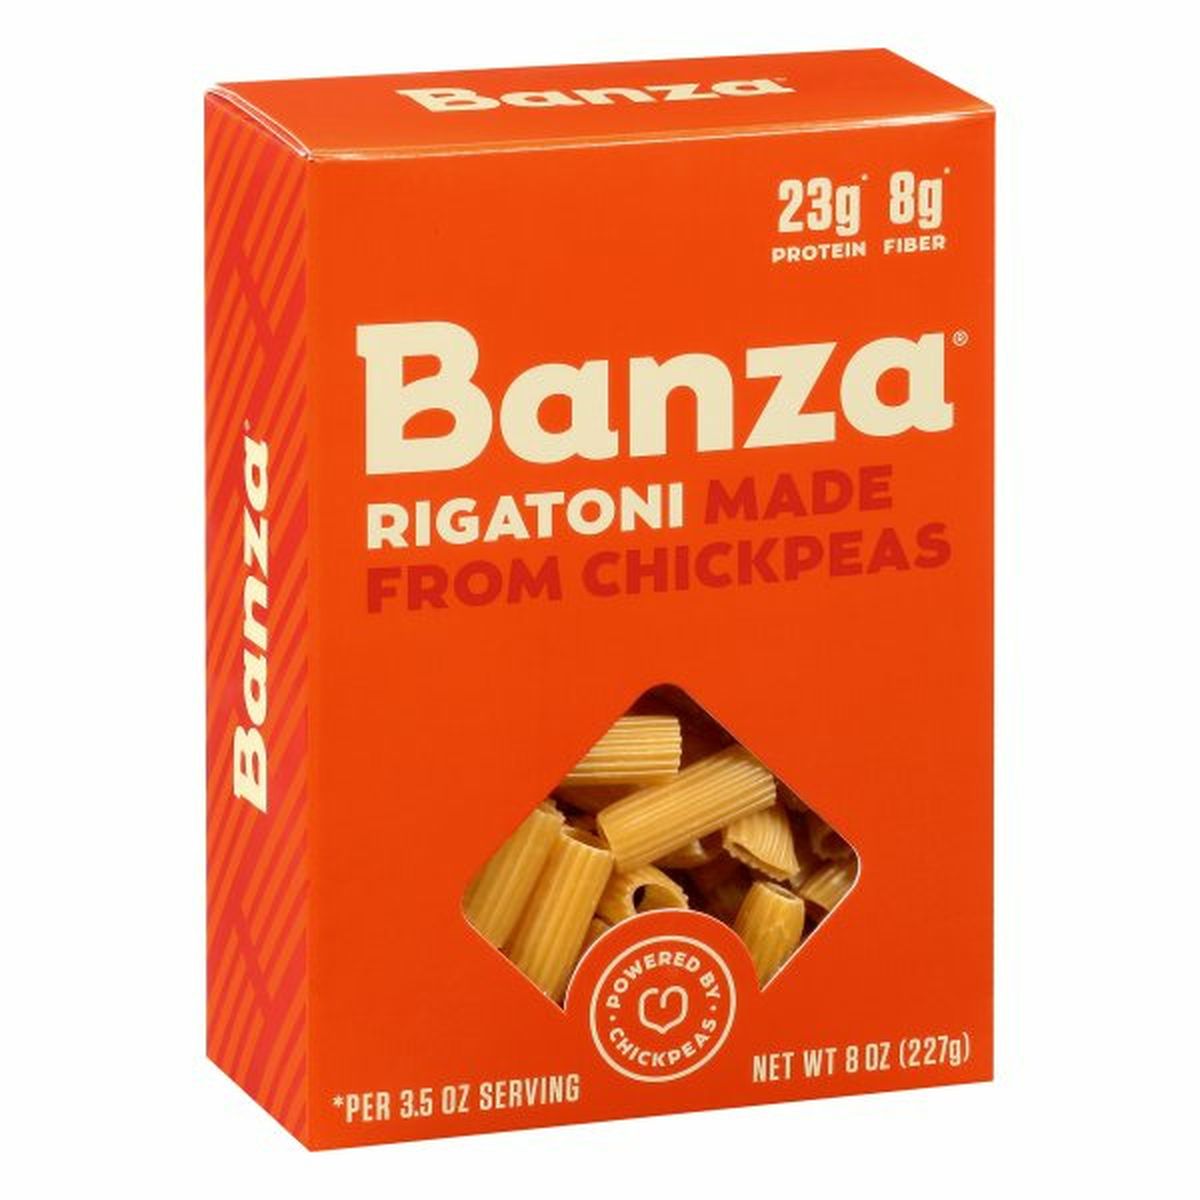 Calories in Banza Rigatoni, Made from Chickpeas